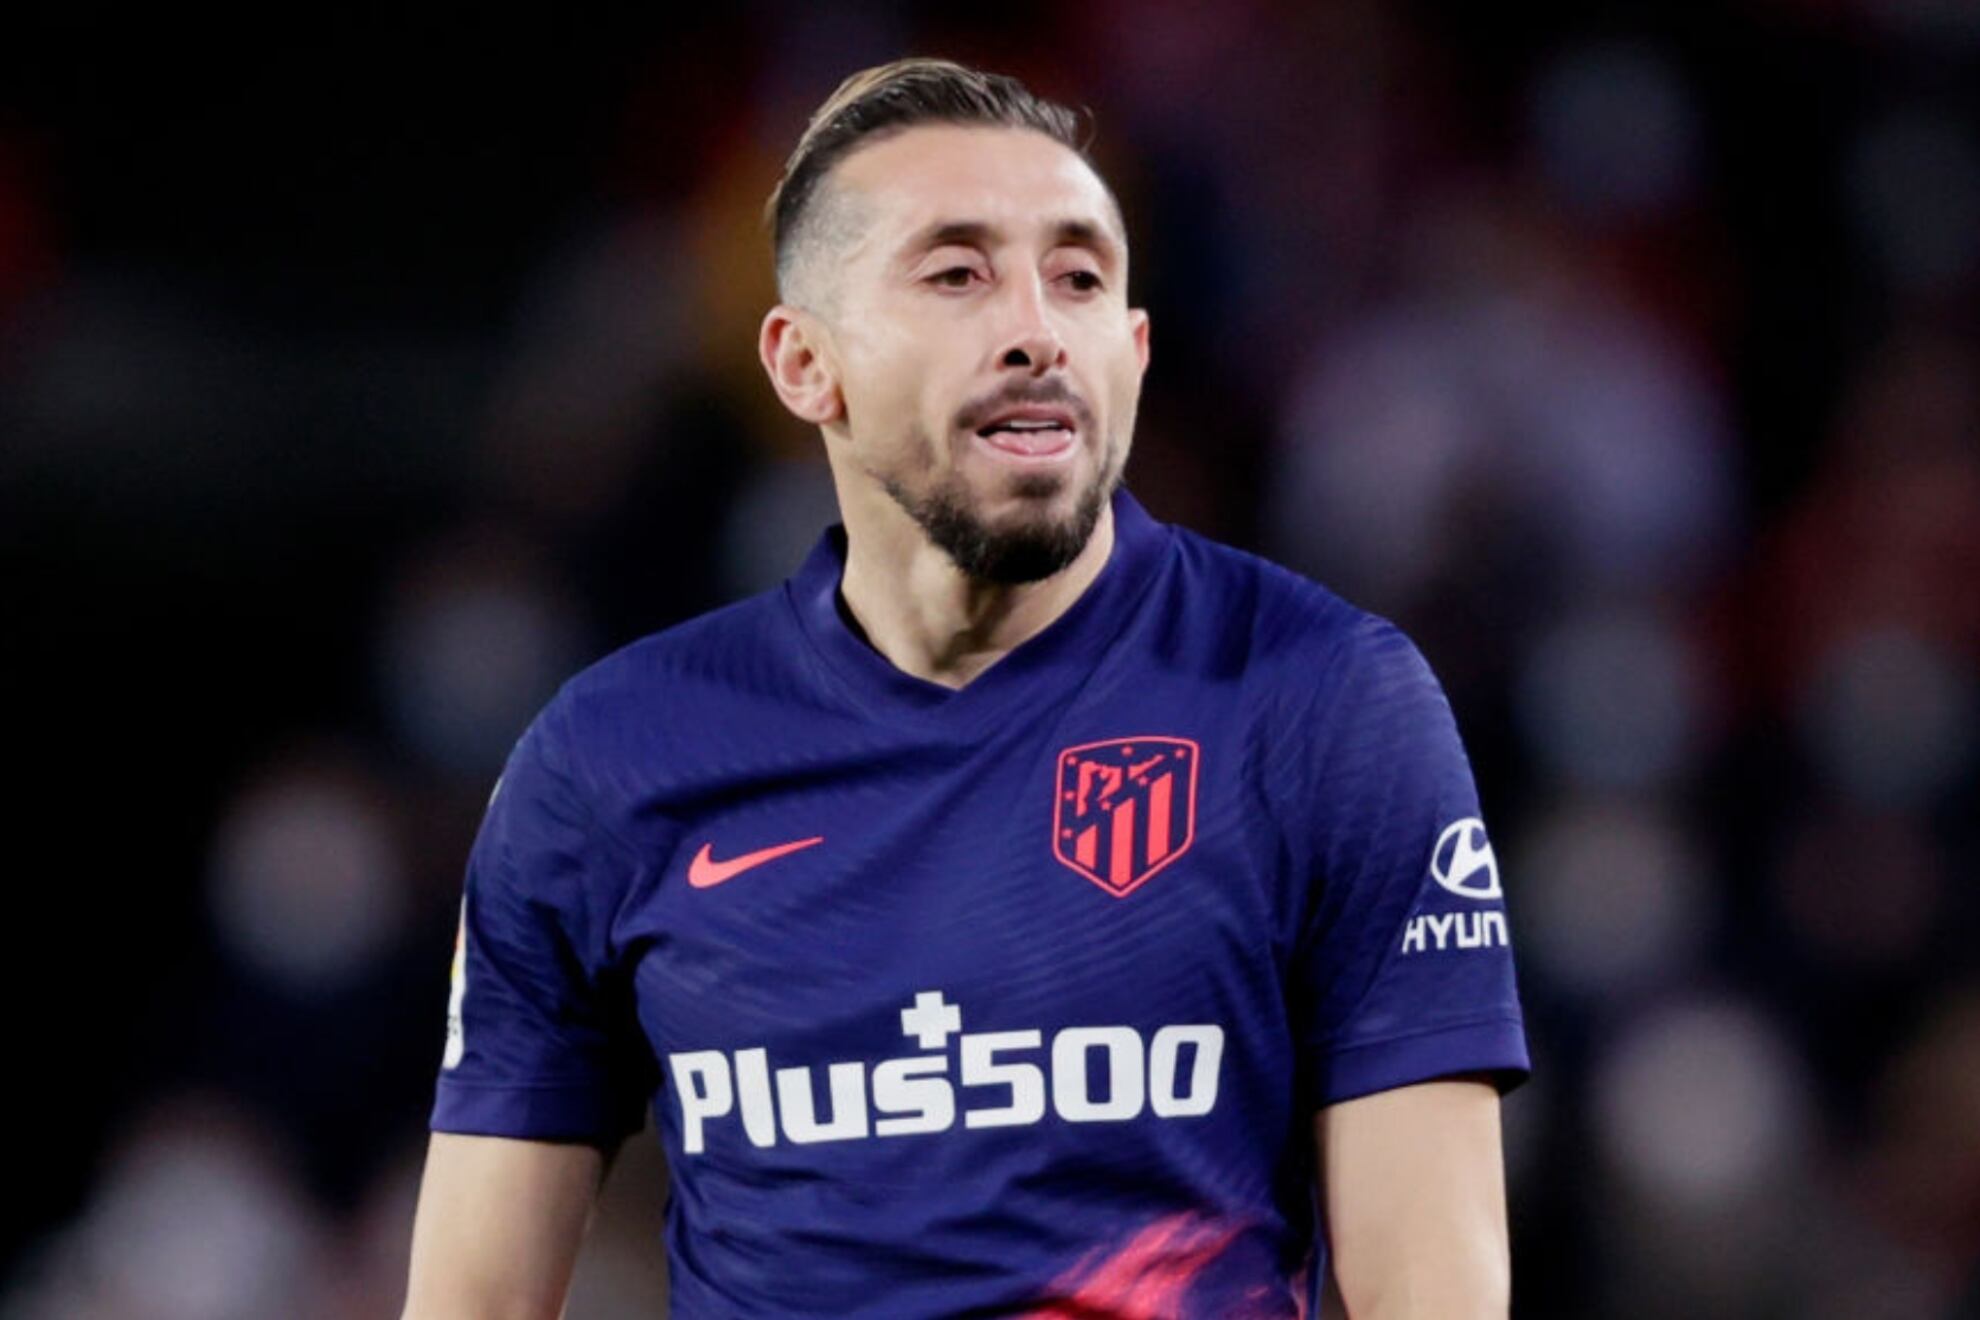 The billionaire that could buy Atlético Madrid just to make Héctor Herrera play